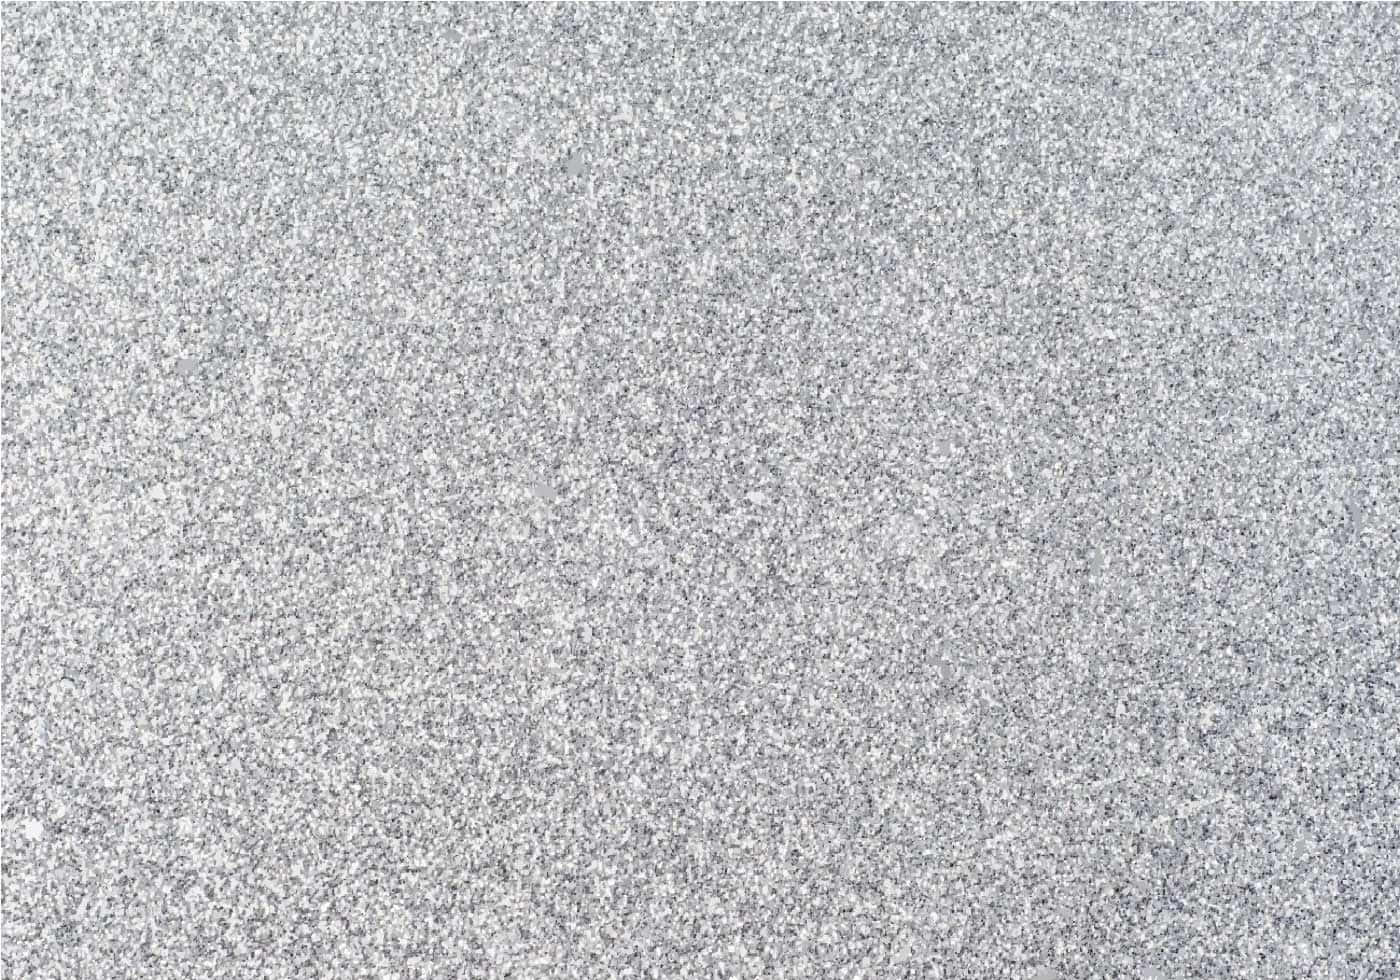 Shine bright like a diamond with this sparkling silver glitter background